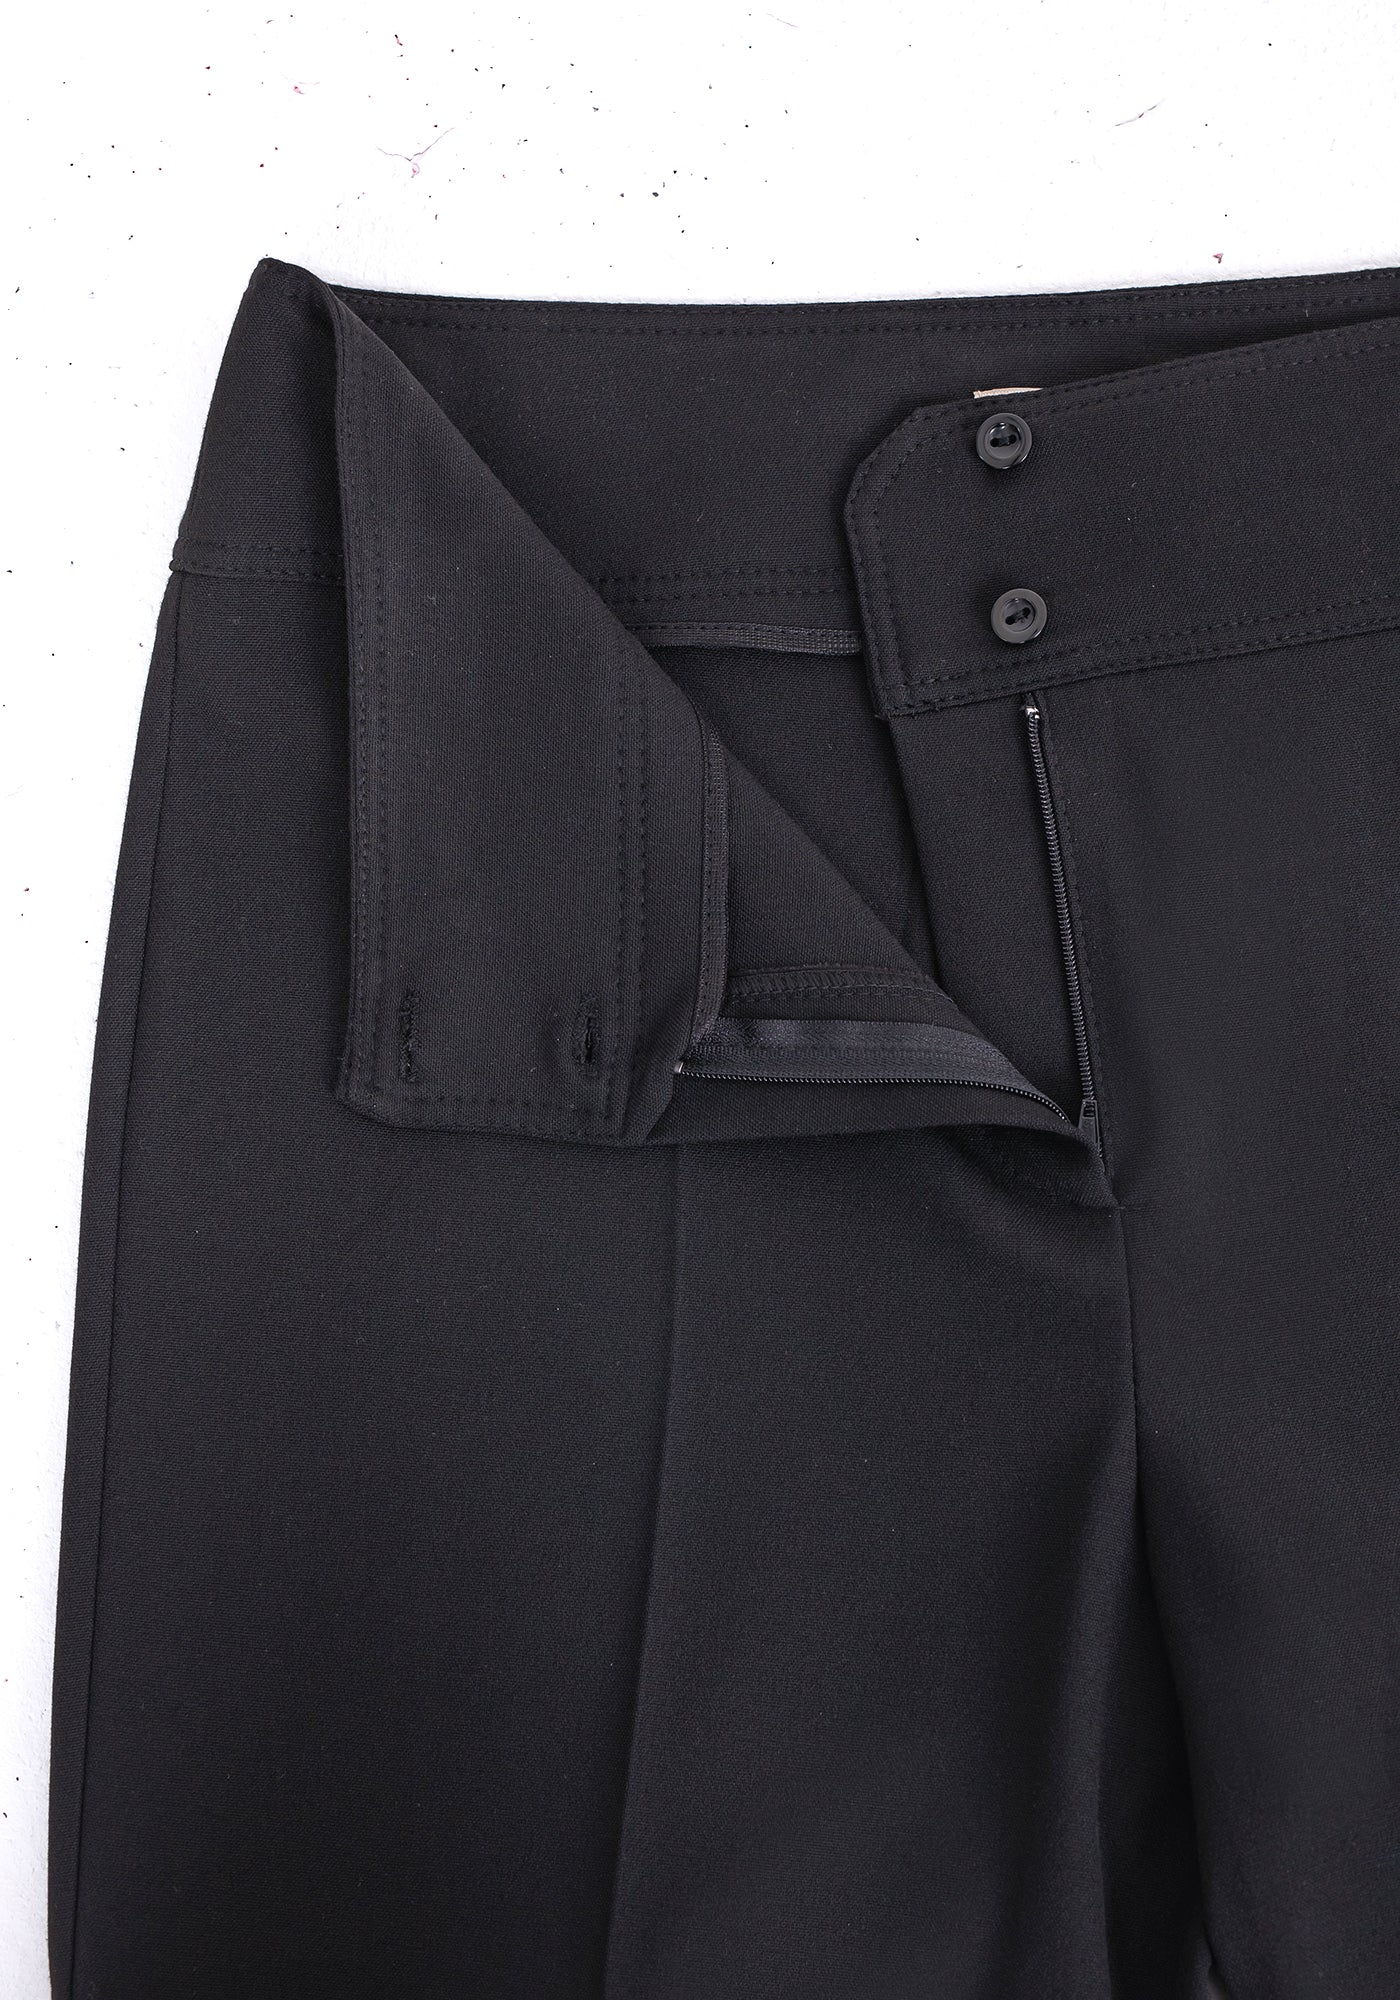 Straight Leg Fit All Day Comfortable Dress Pants G-Line